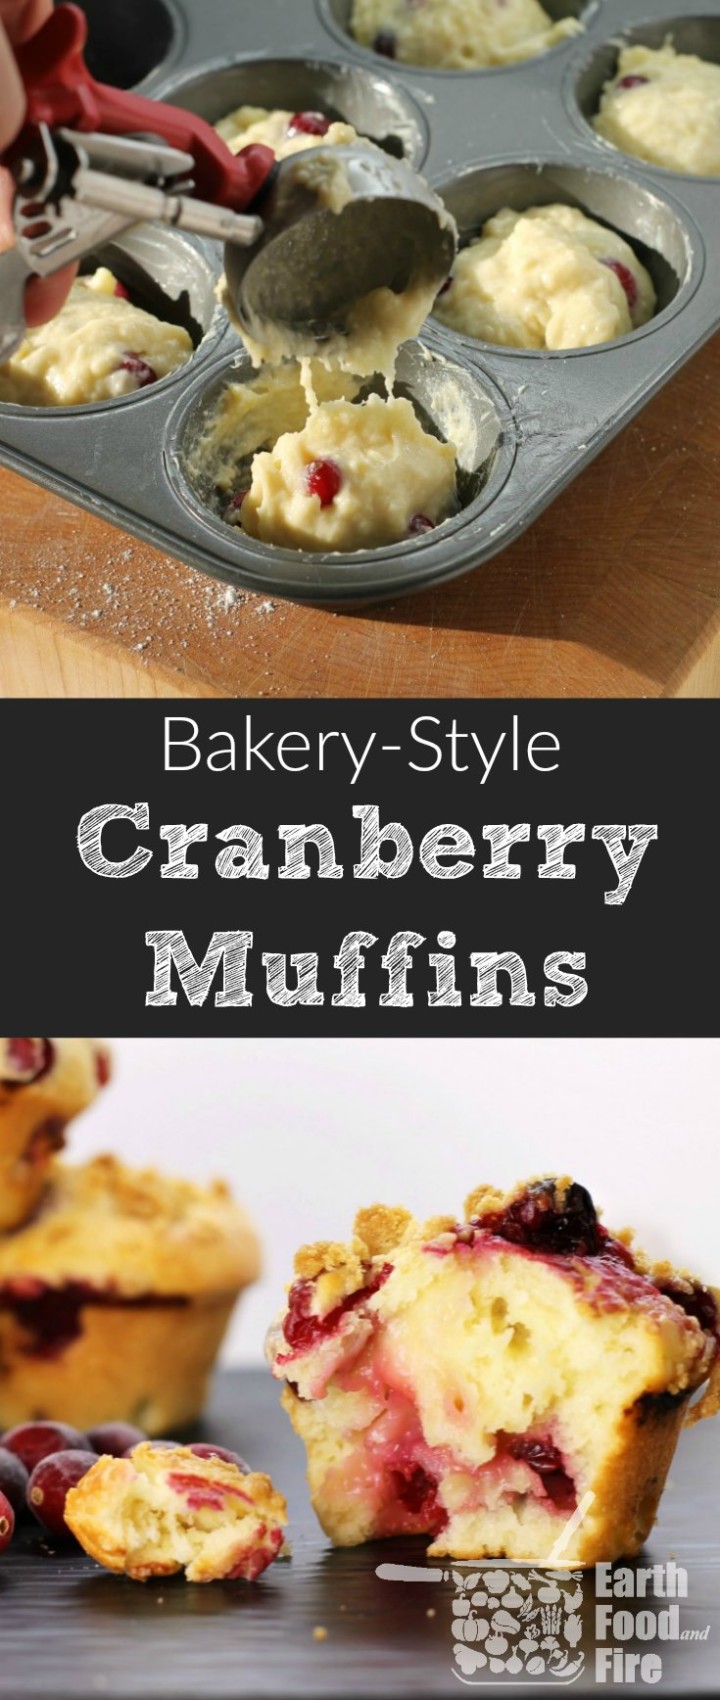 Bake these delicious bakery-style cranberry muffins at home! Perfect for breakfast these muffins are fluffy, moist & full of fresh fruit, a hit in any family!